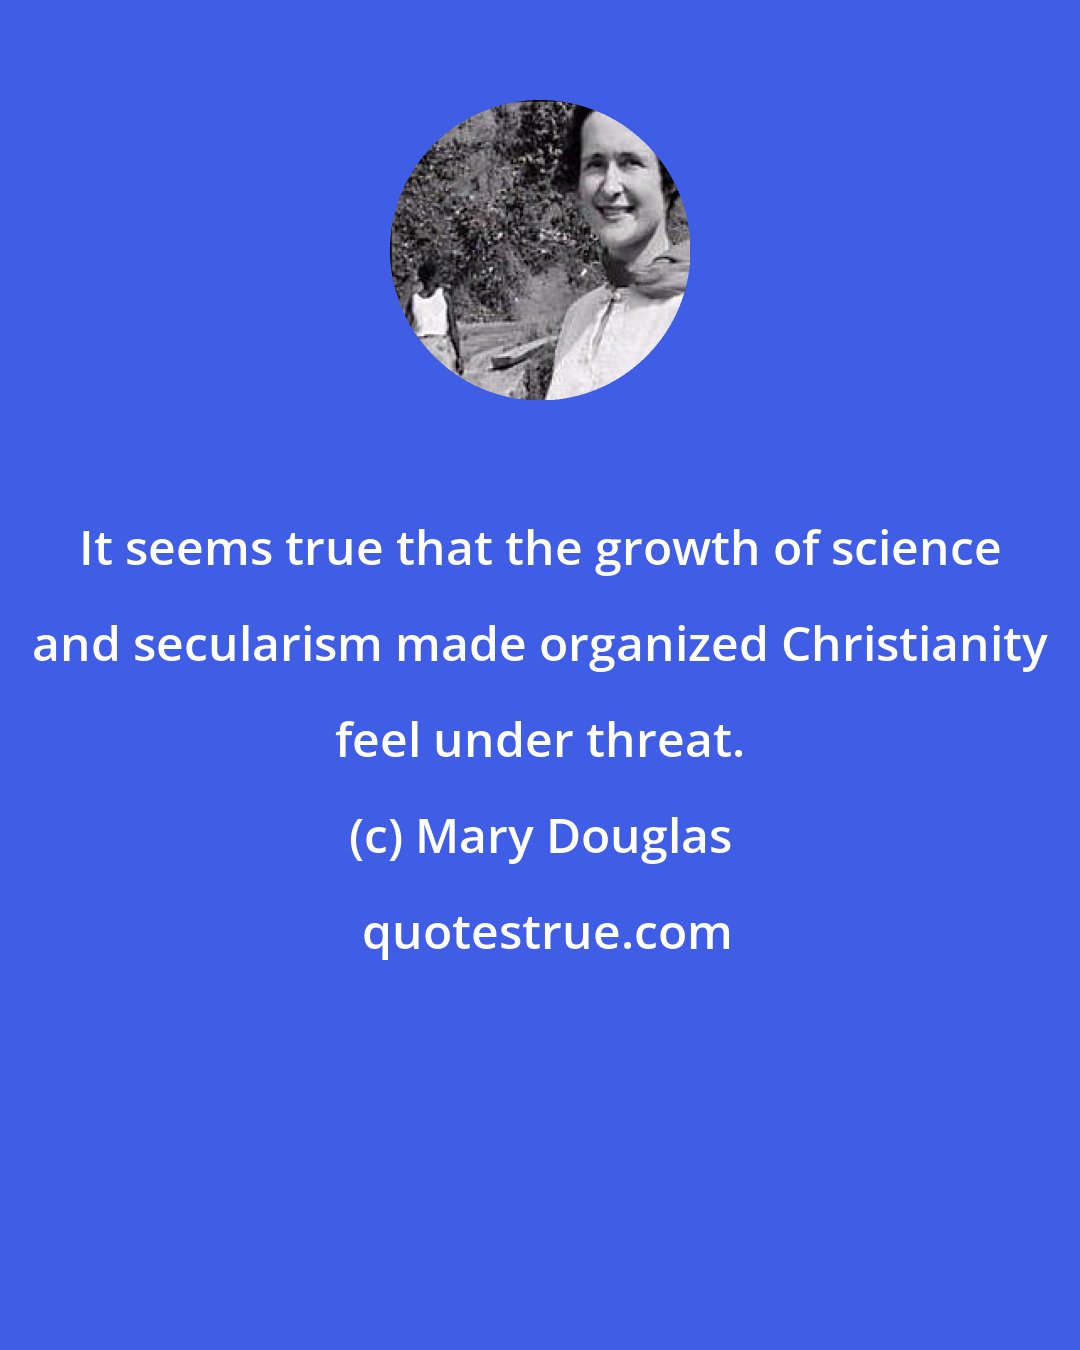 Mary Douglas: It seems true that the growth of science and secularism made organized Christianity feel under threat.